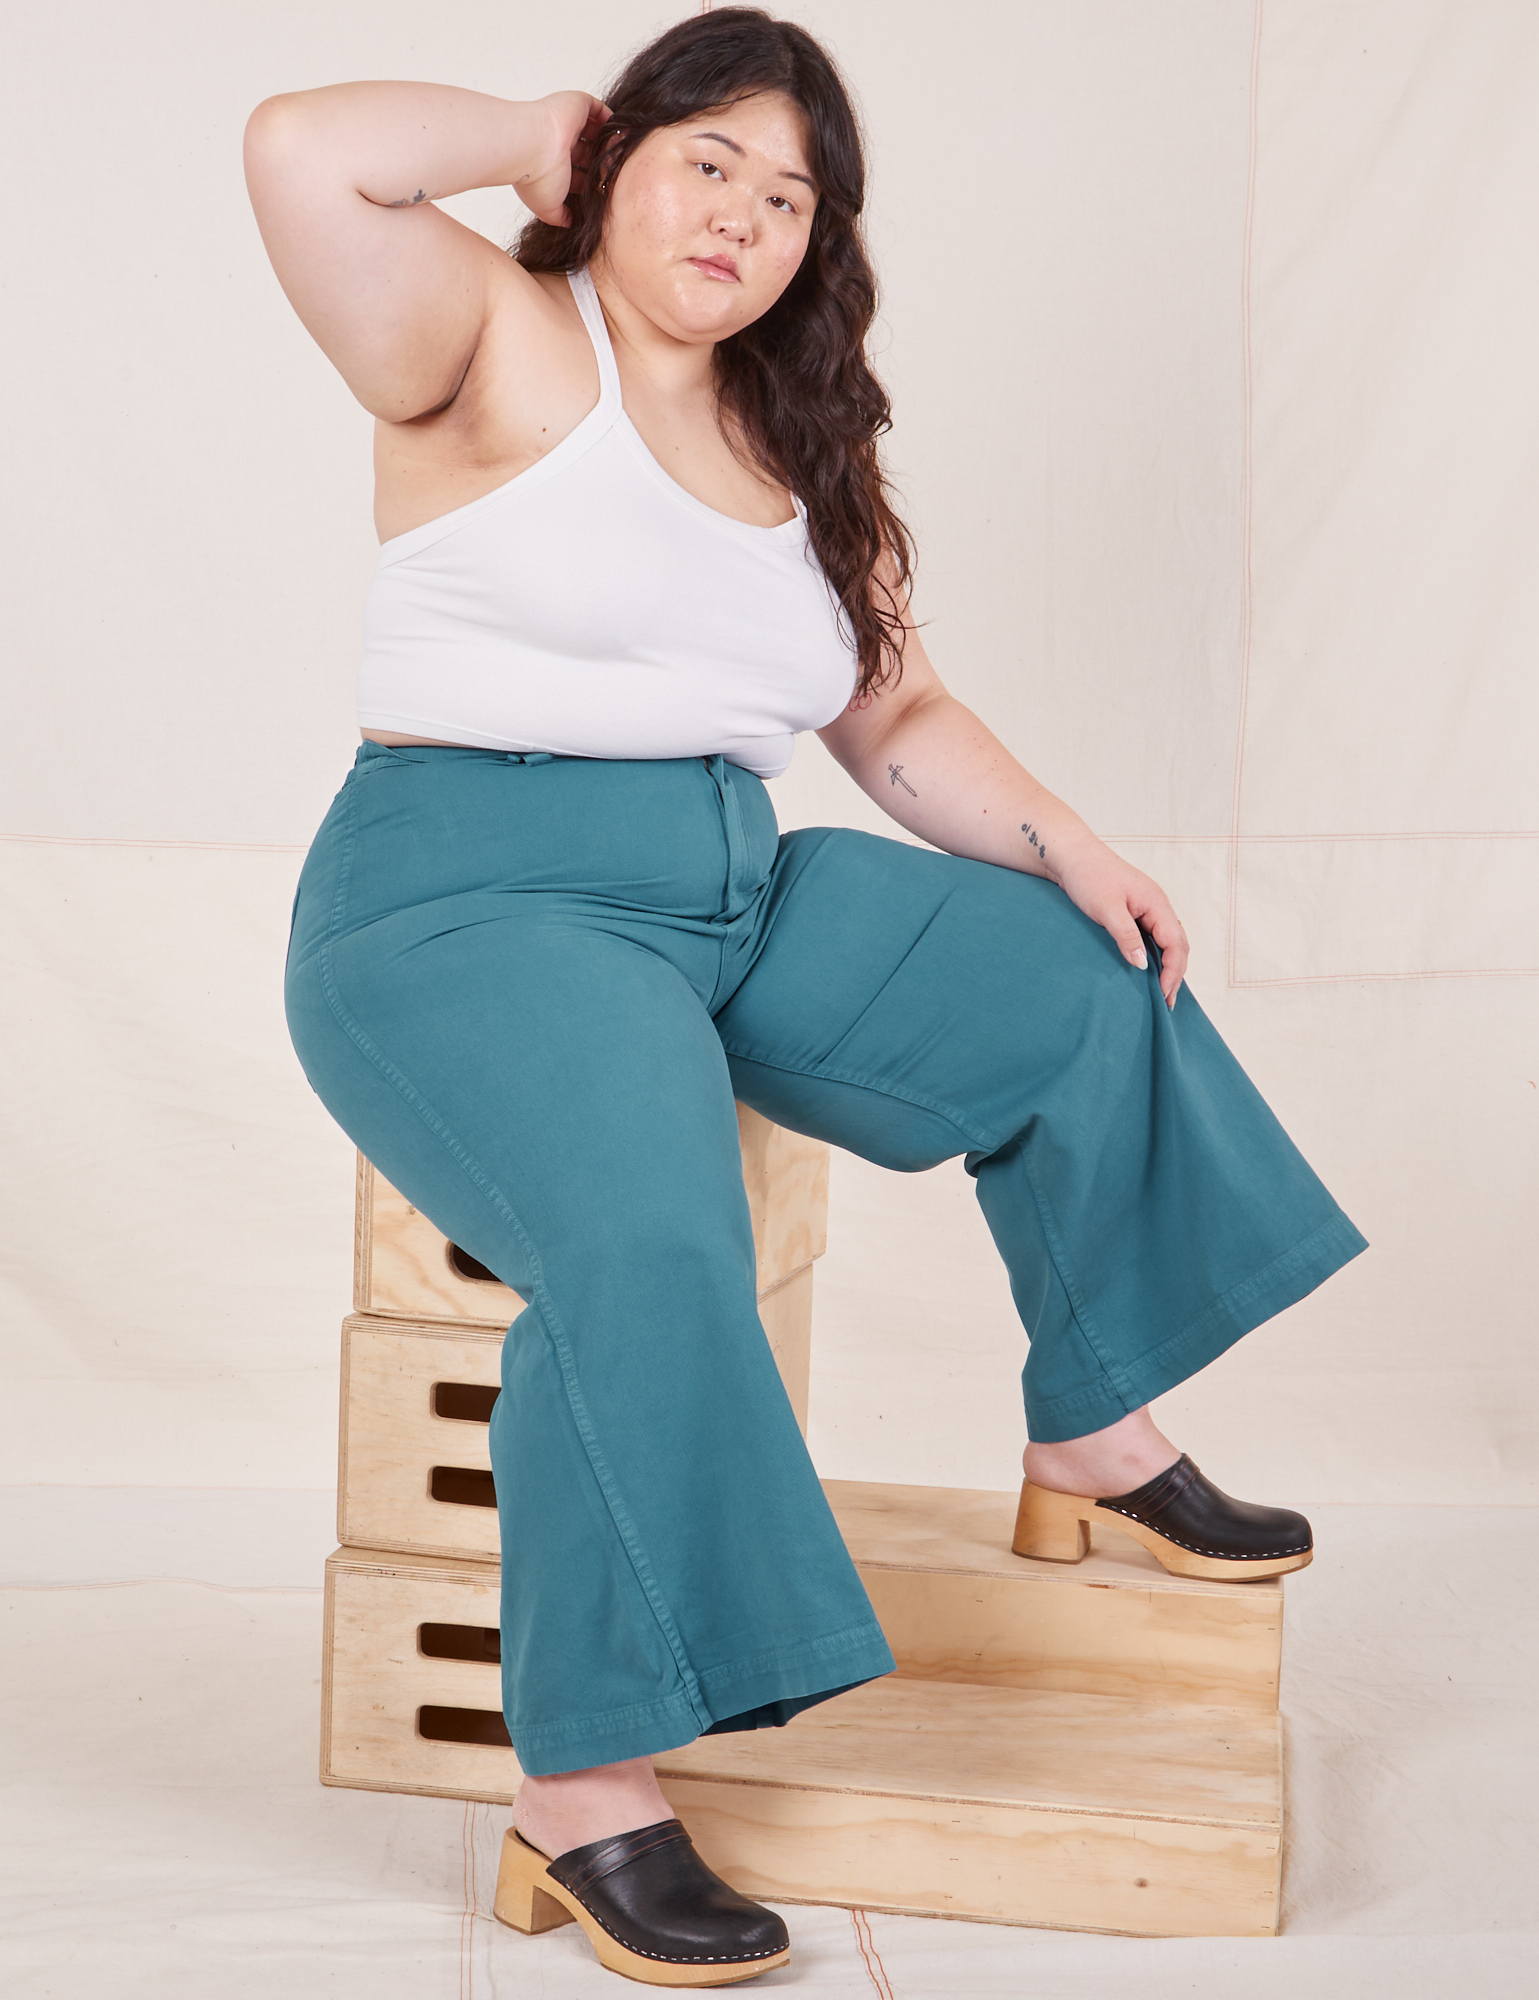 Ashley is sitting on a stack of wooden crates. She is wearing Petite Bell Bottoms in Marine Blue and vintage off-white Halter Top.